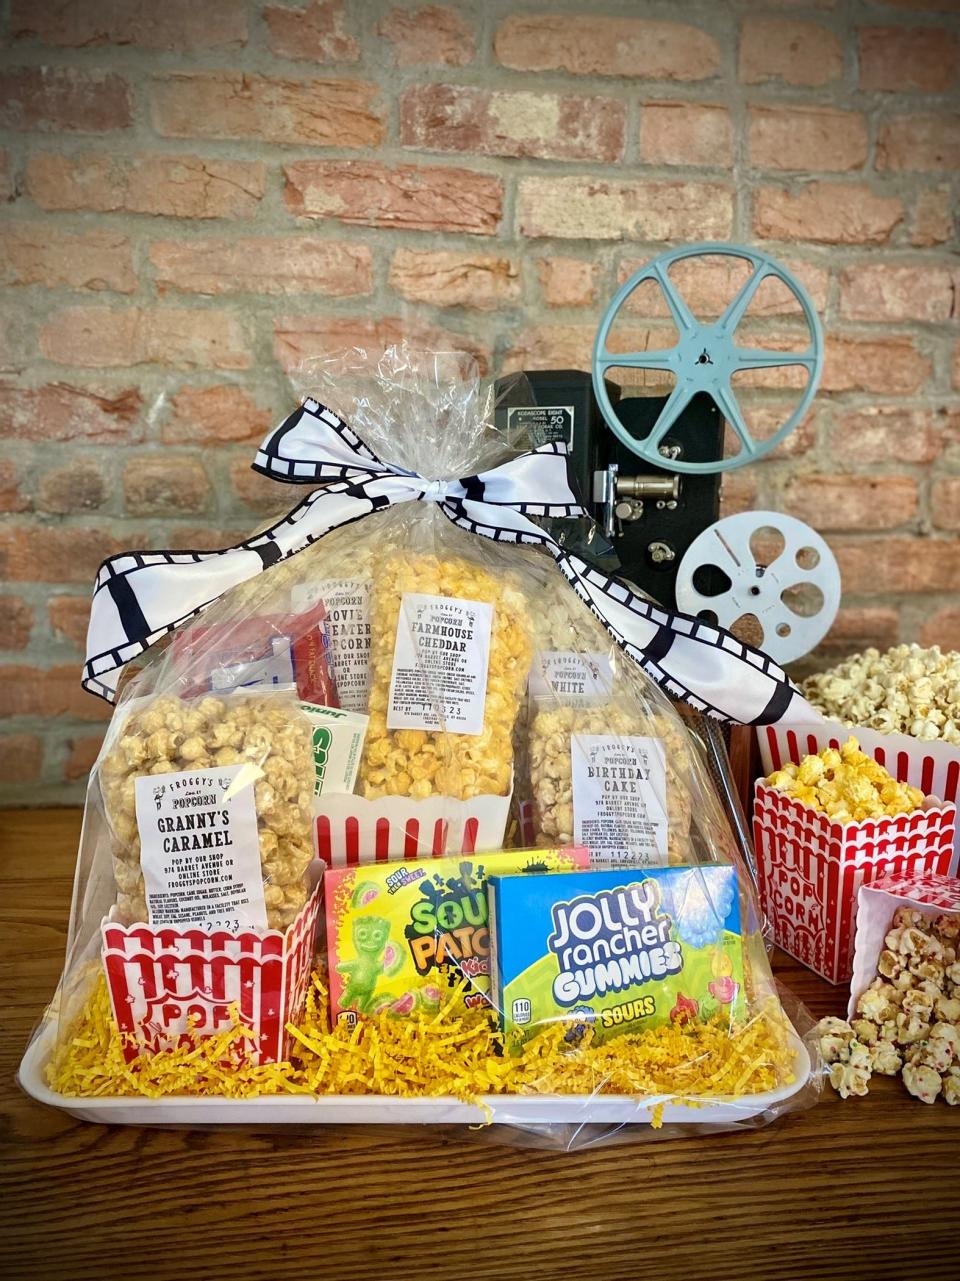 This Movie Night Pack from Froggy's Popcorn features an assortment of popcorn and sweet treats.